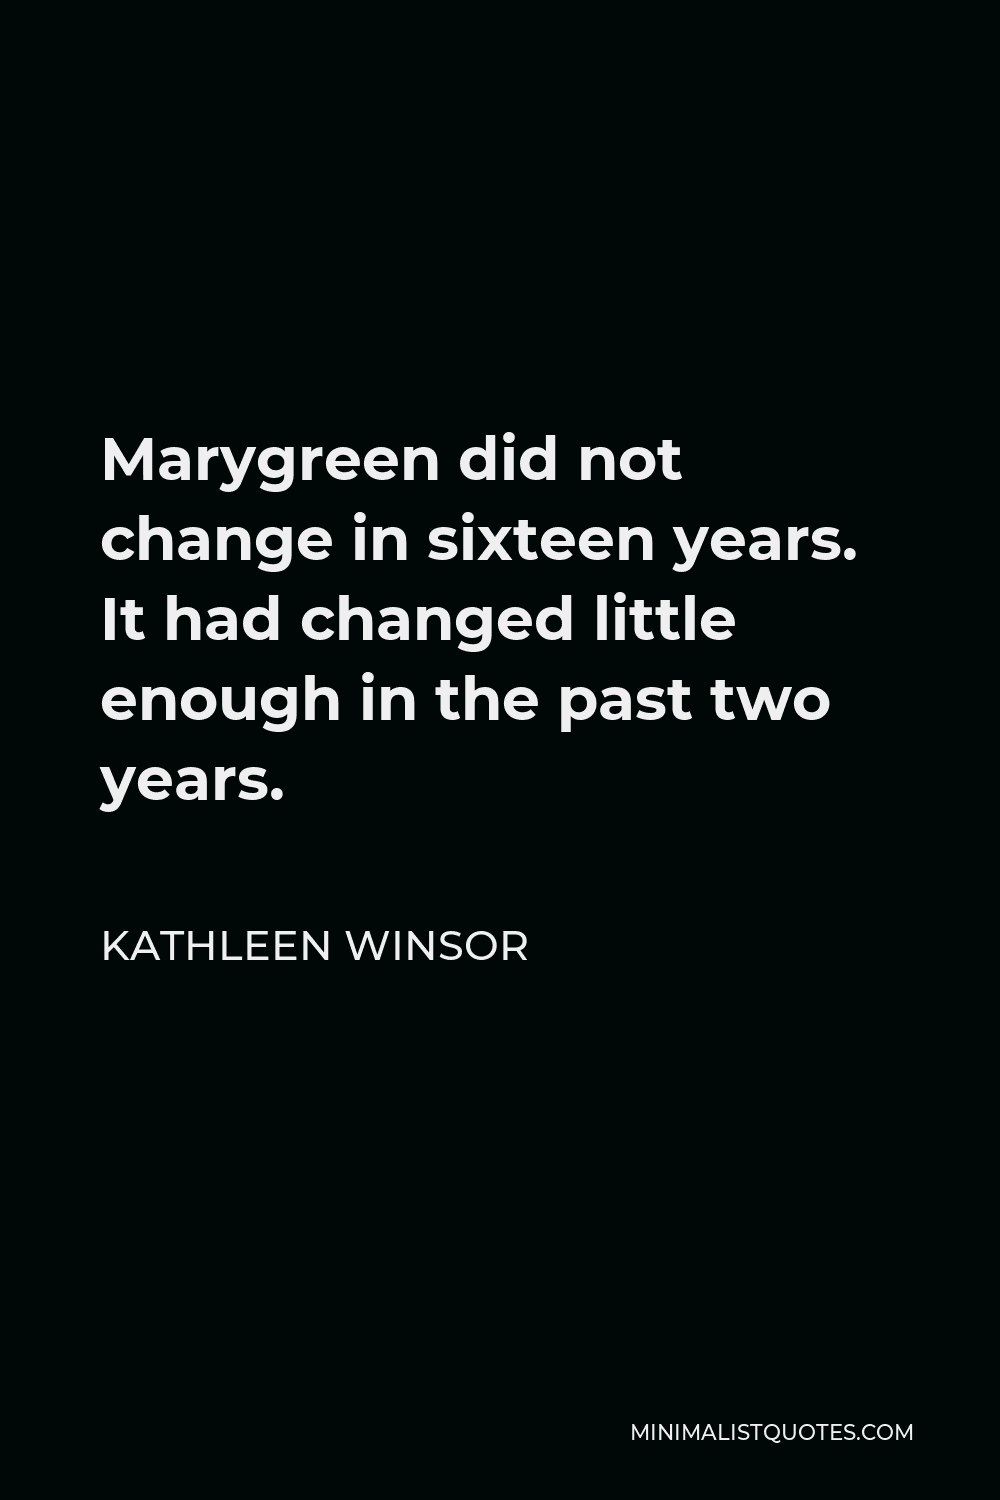 Kathleen Winsor Quote - Marygreen did not change in sixteen years. It had changed little enough in the past two years.